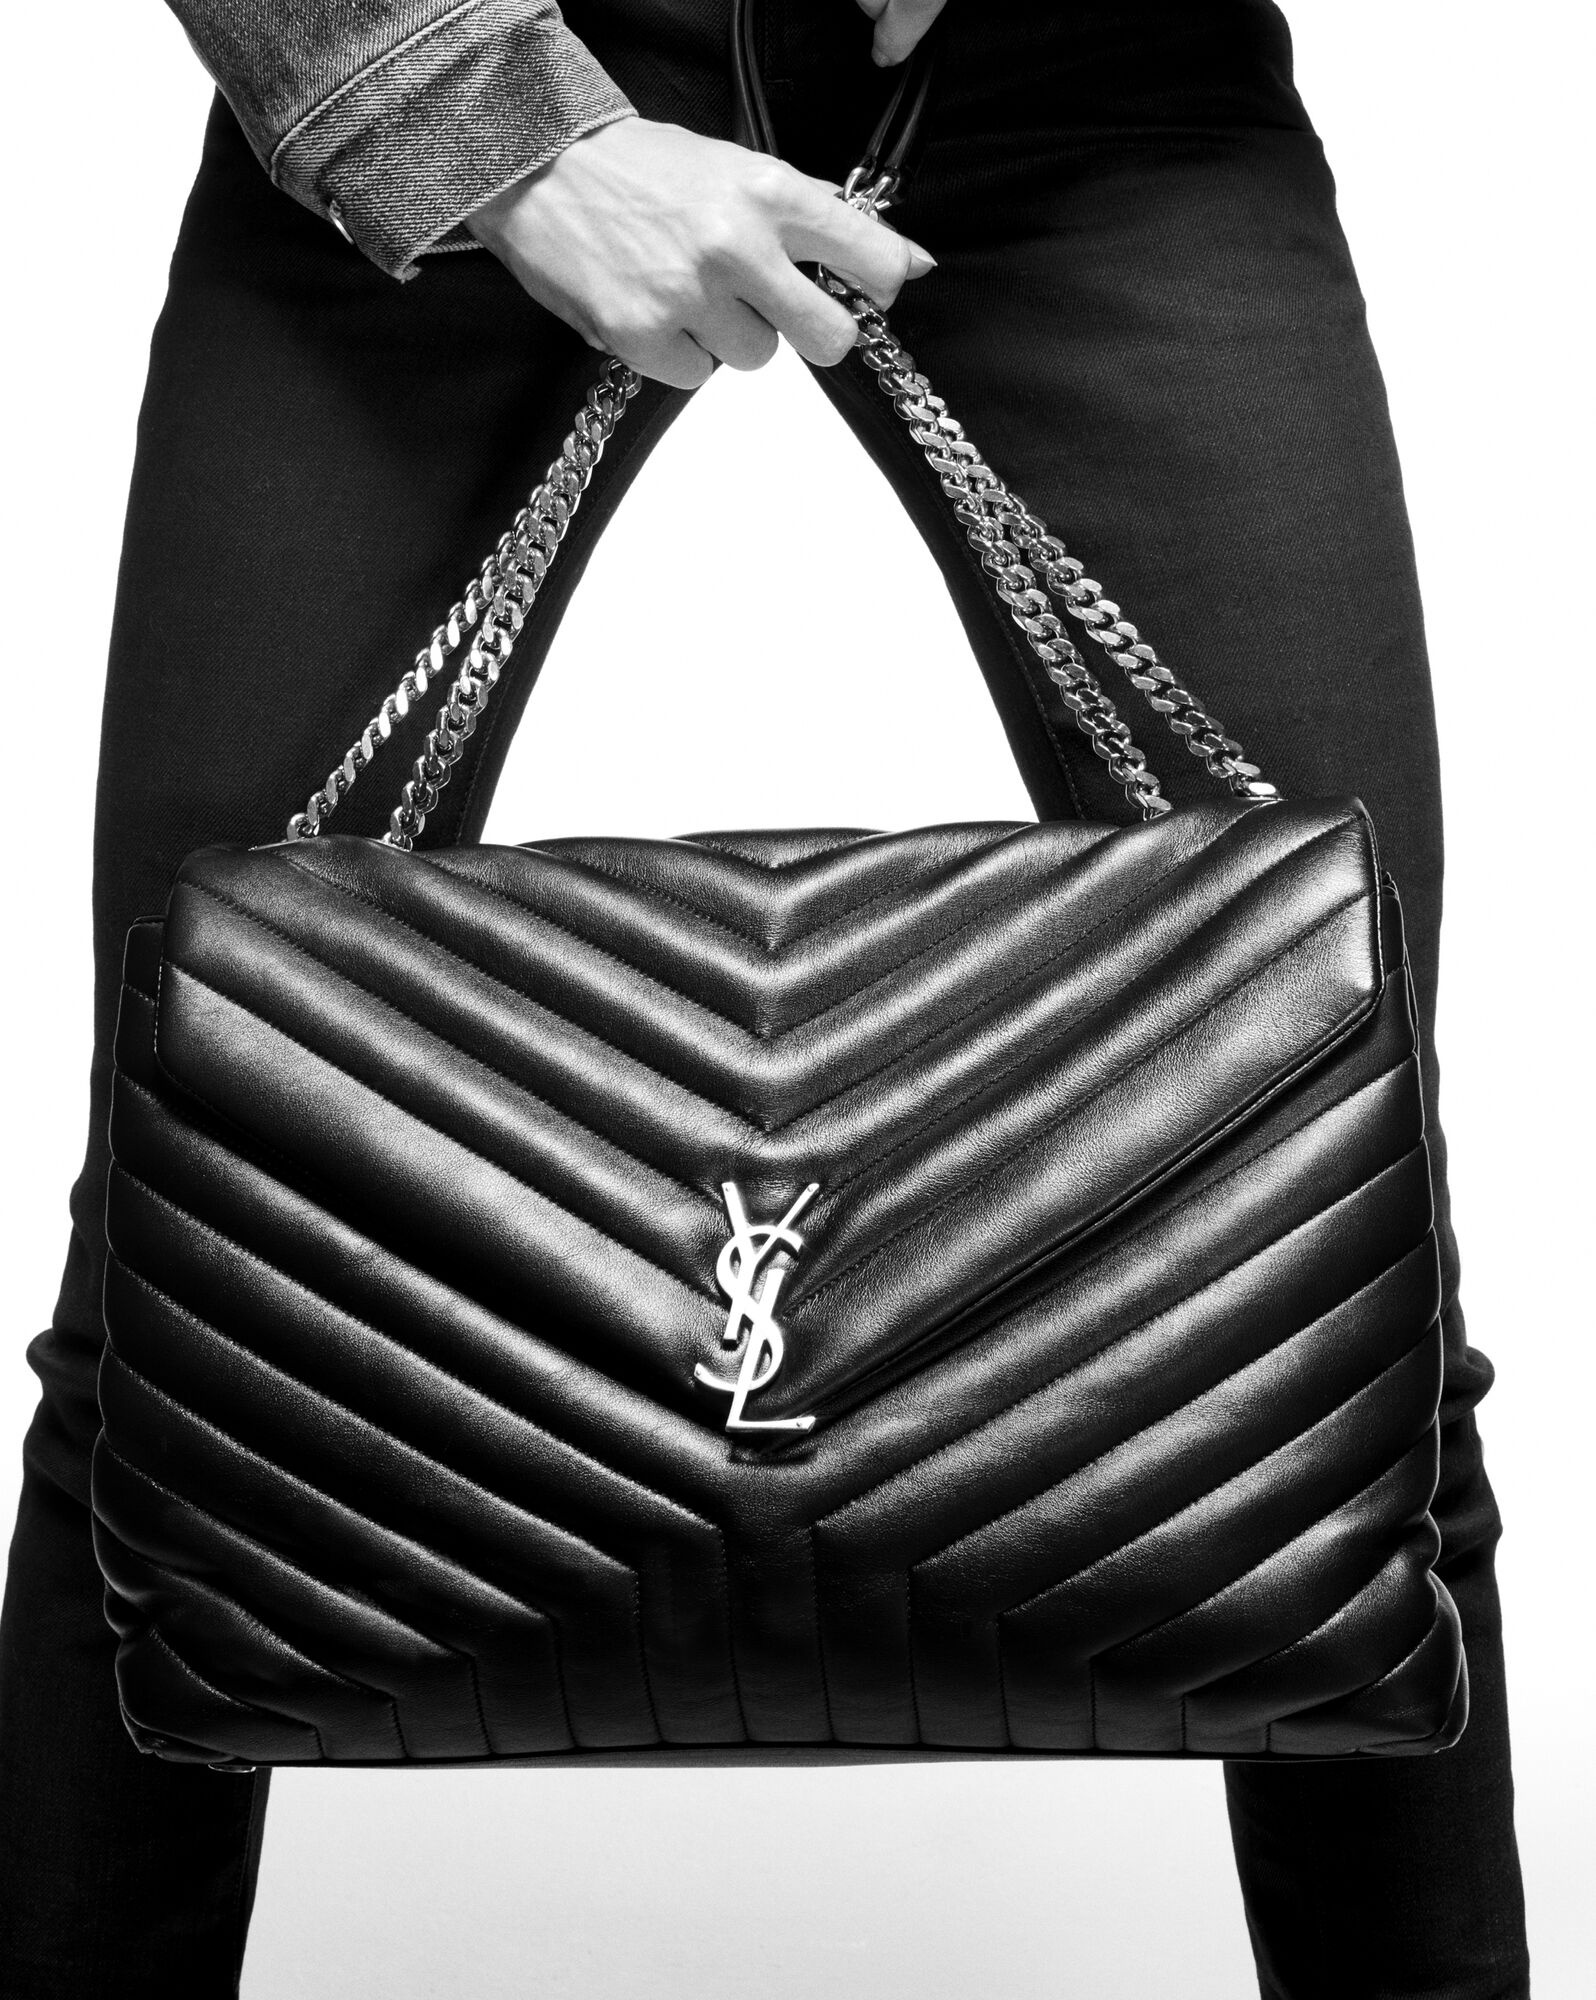 loulou large chain bag in matelassé "y" leather - 2